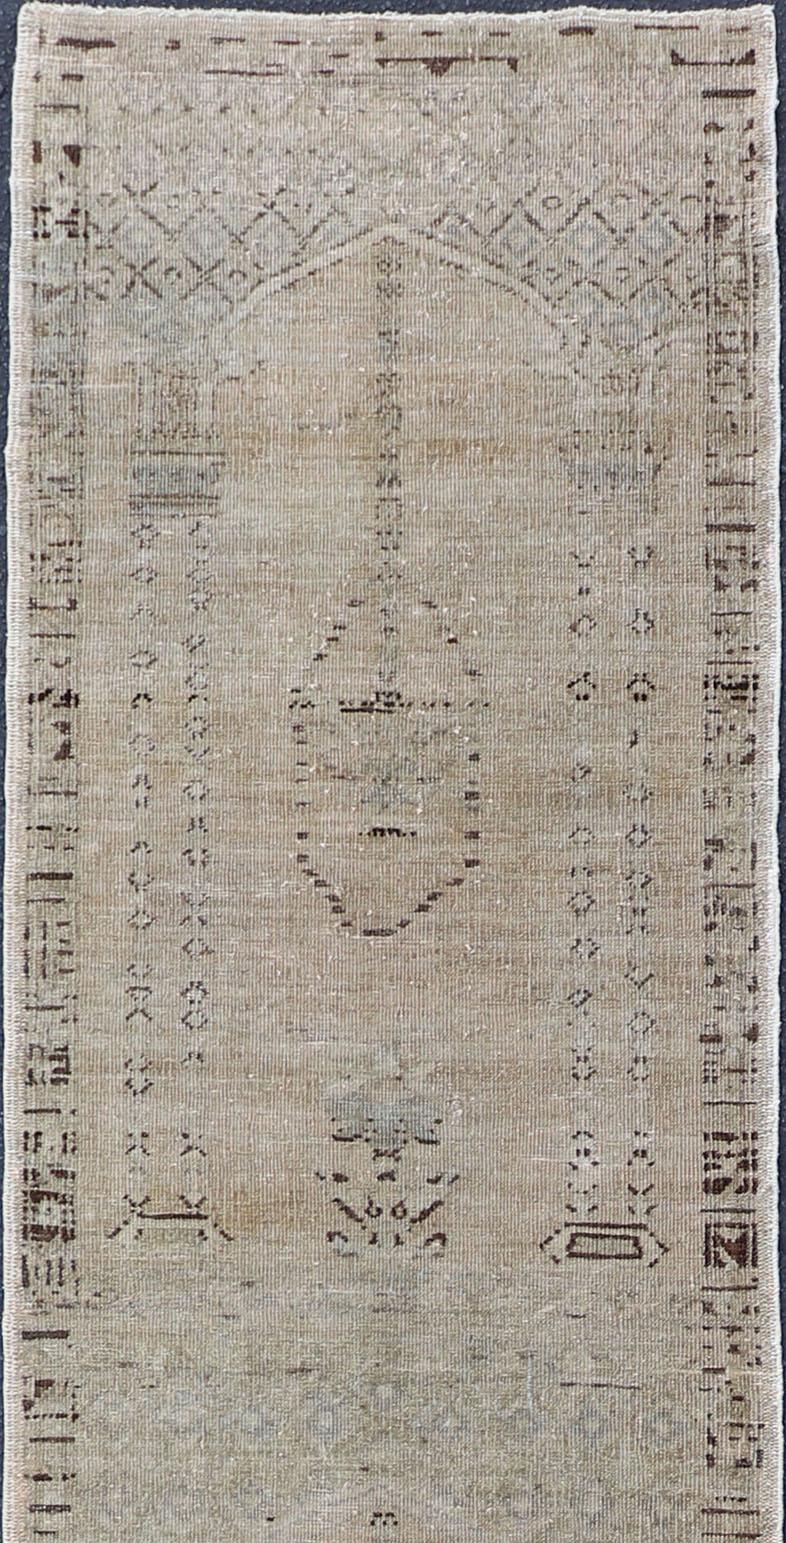 Distressed Turkish long and narrow runner with floral design and neutral colors. 
Rug/EN-94027, 1940 vintage Oushak runner

Measures:2'5 x 17'3

This vintage Turkish Oushak long and narrow runner has been neutralized to create faded pigments